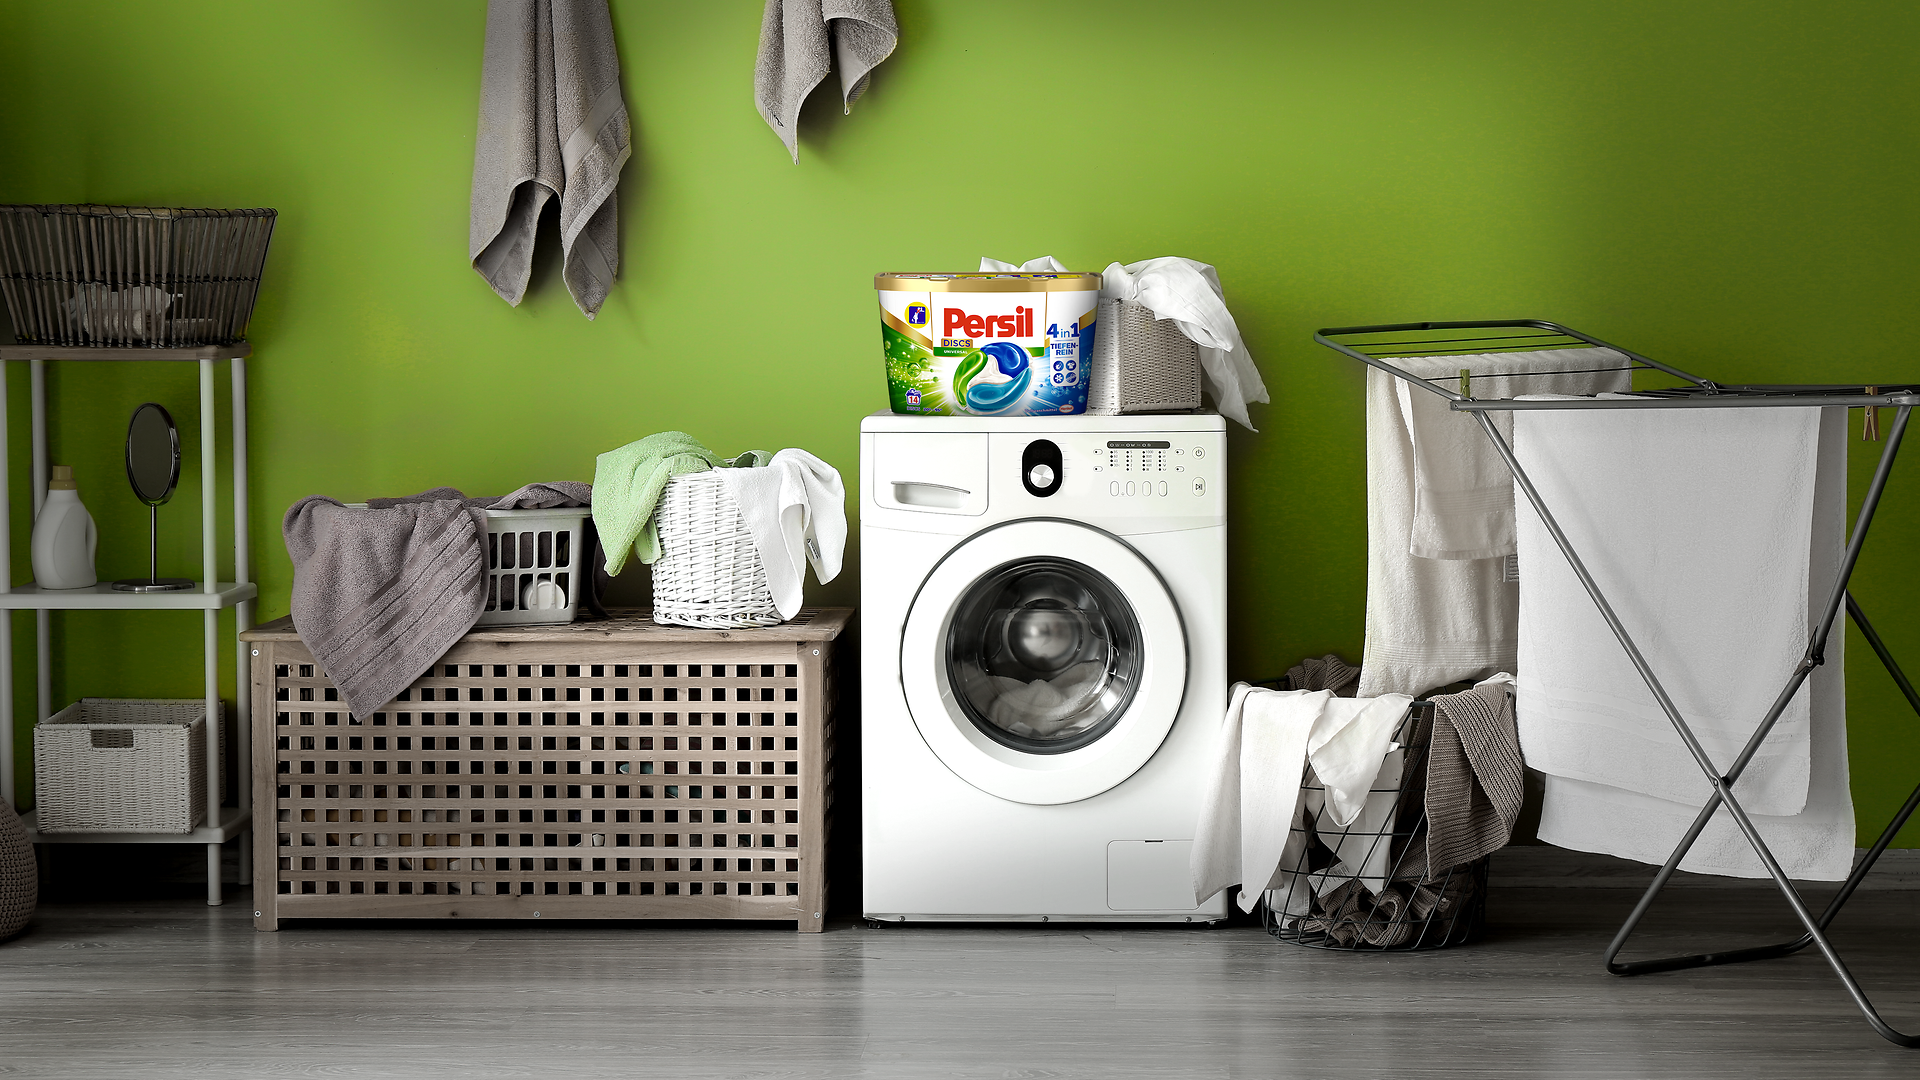 Persil Discs 4in1 on a washing machine